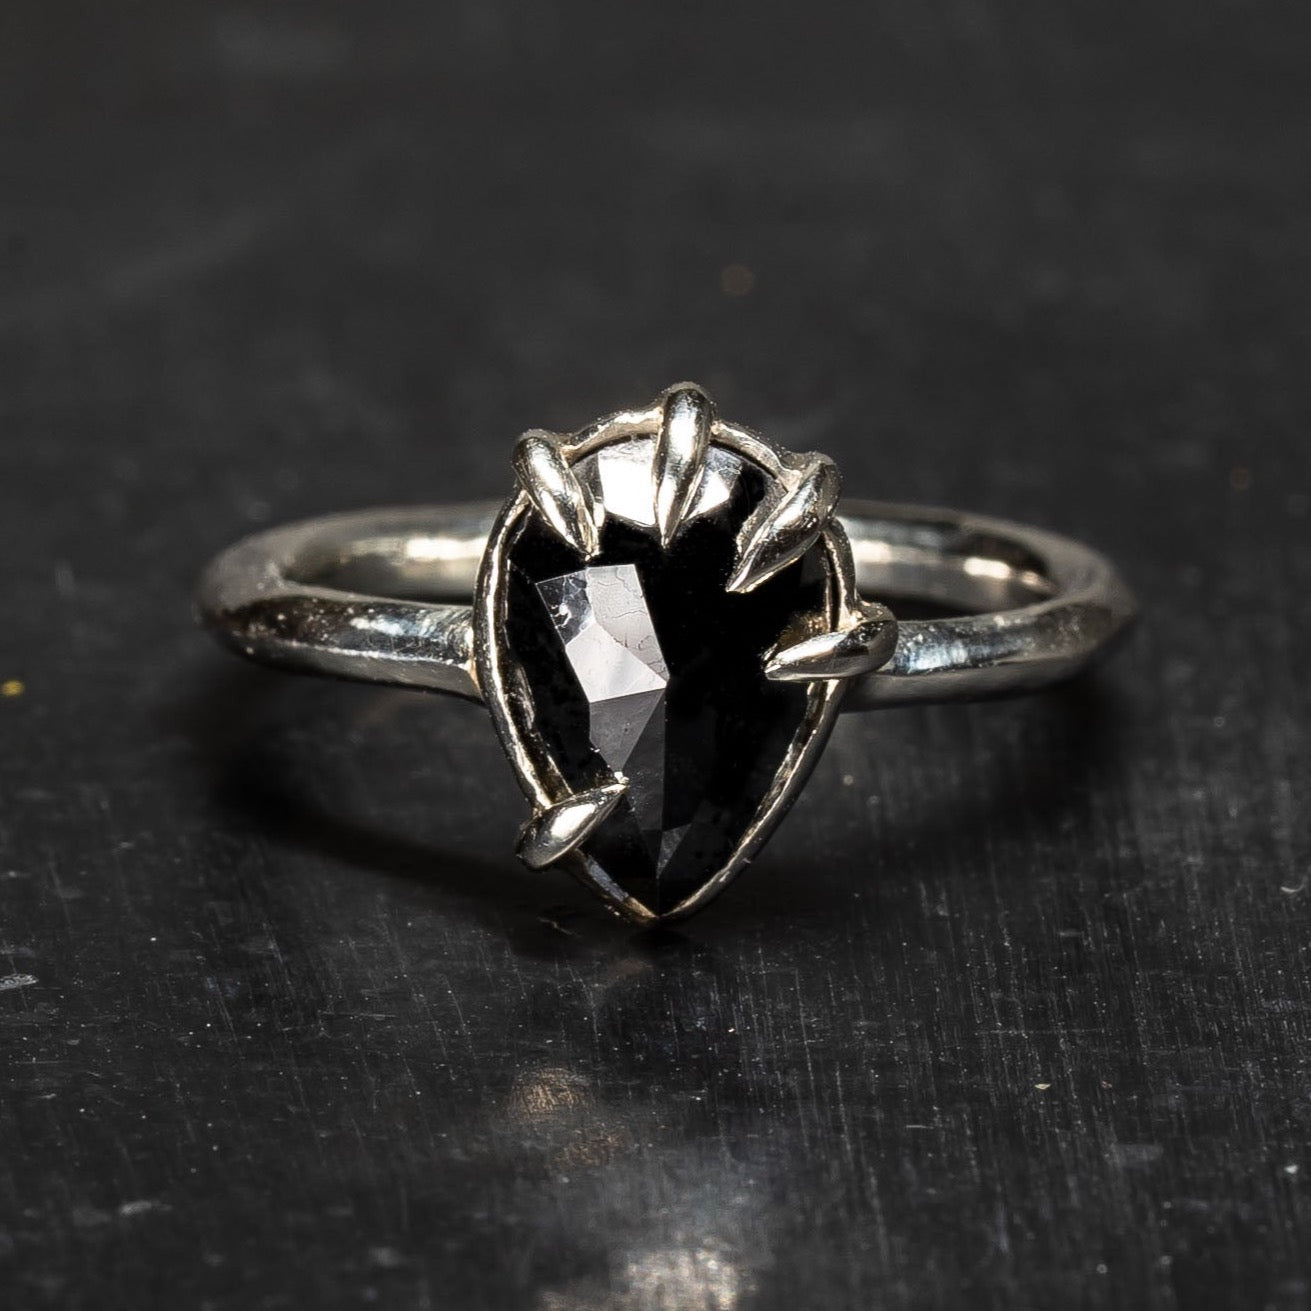 Teardrop shaped Black Diamond Ring with unique  claw style grips